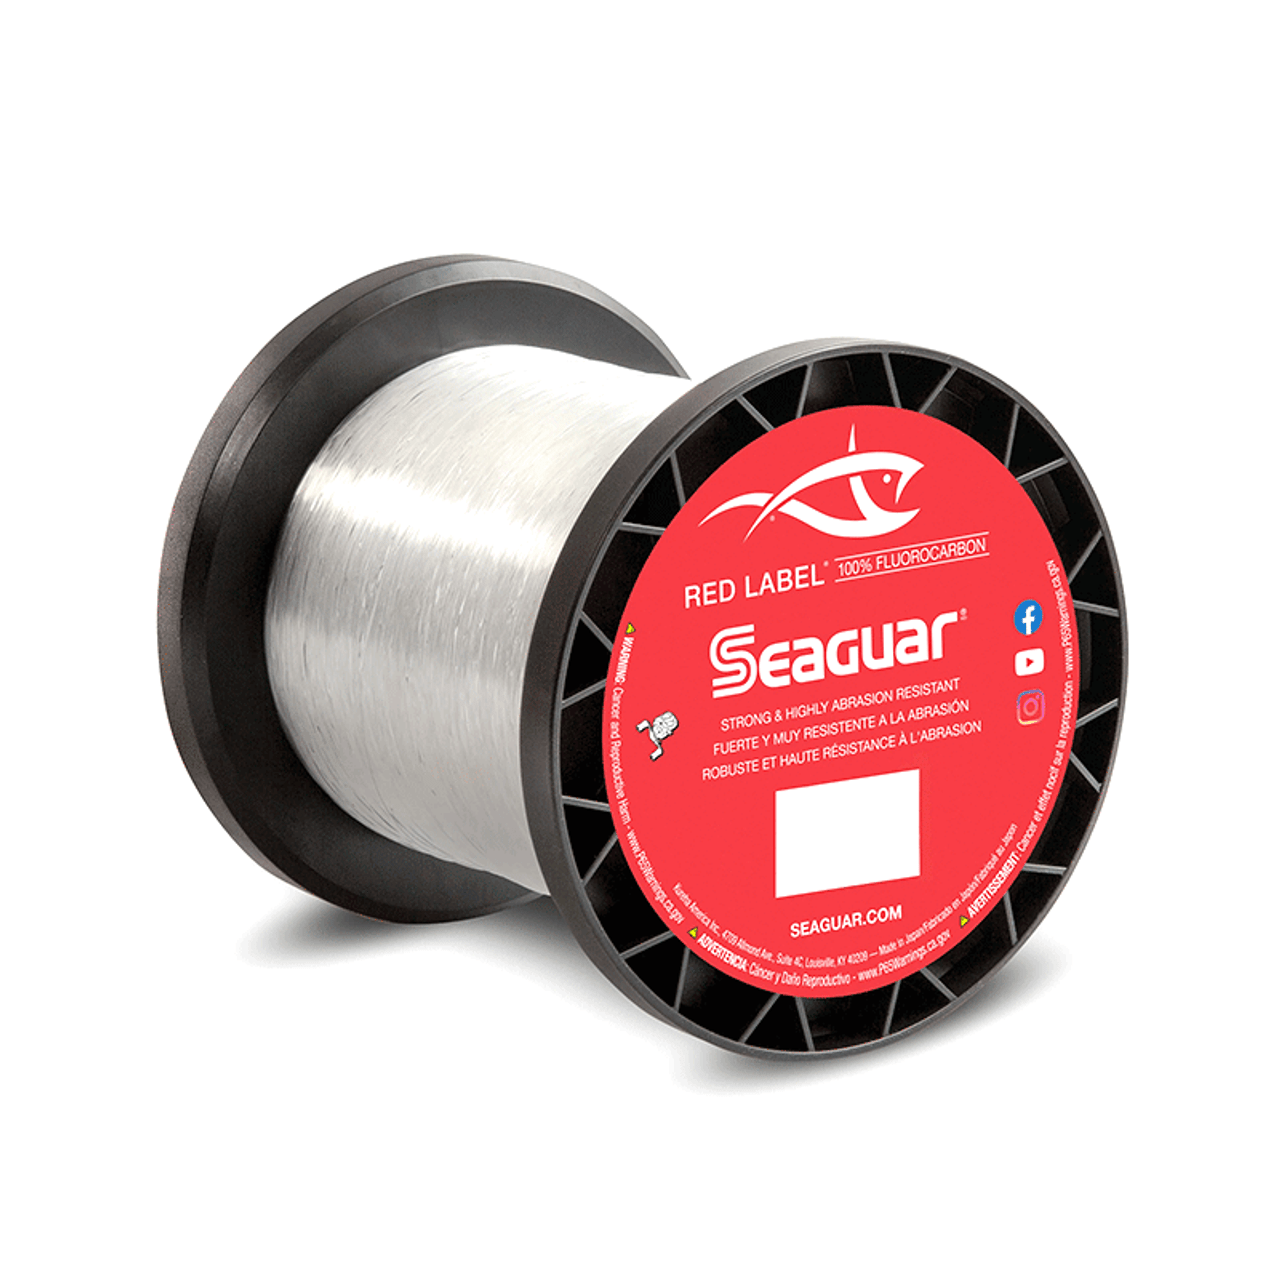 Red Label Clear 100% Fluorocarbon 1000 yd Spool